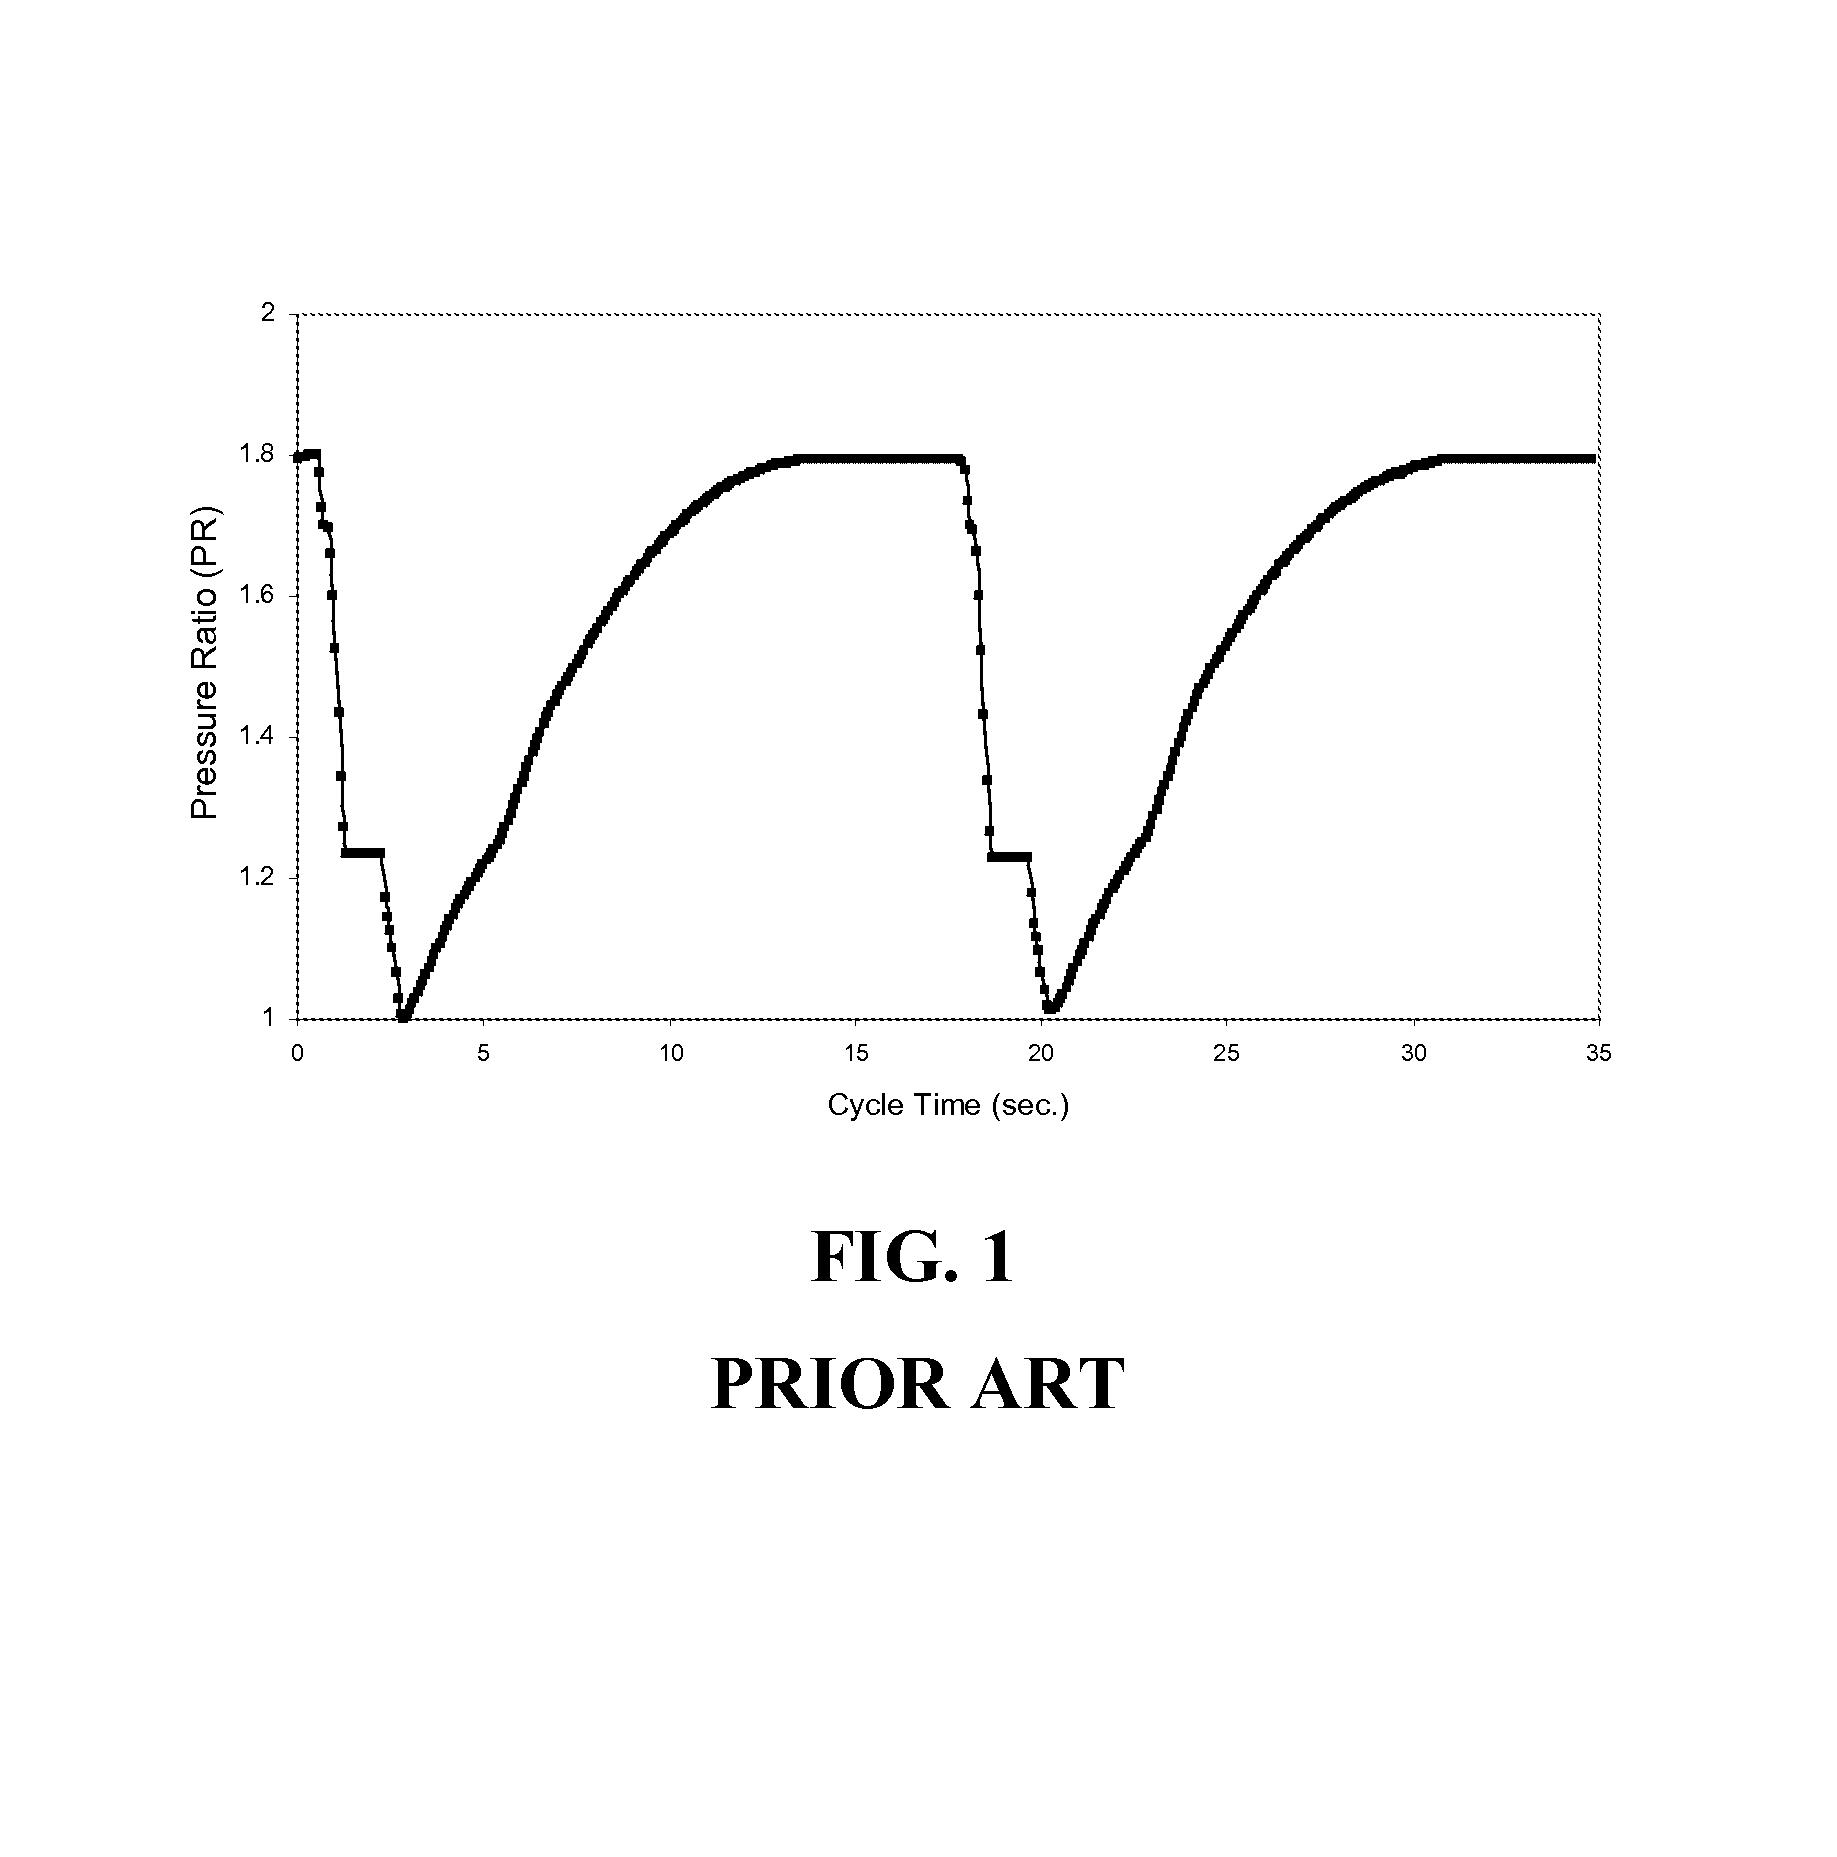 Systems and methods for gas separation using high-speed permanent magnet motors with centrifugal compressors